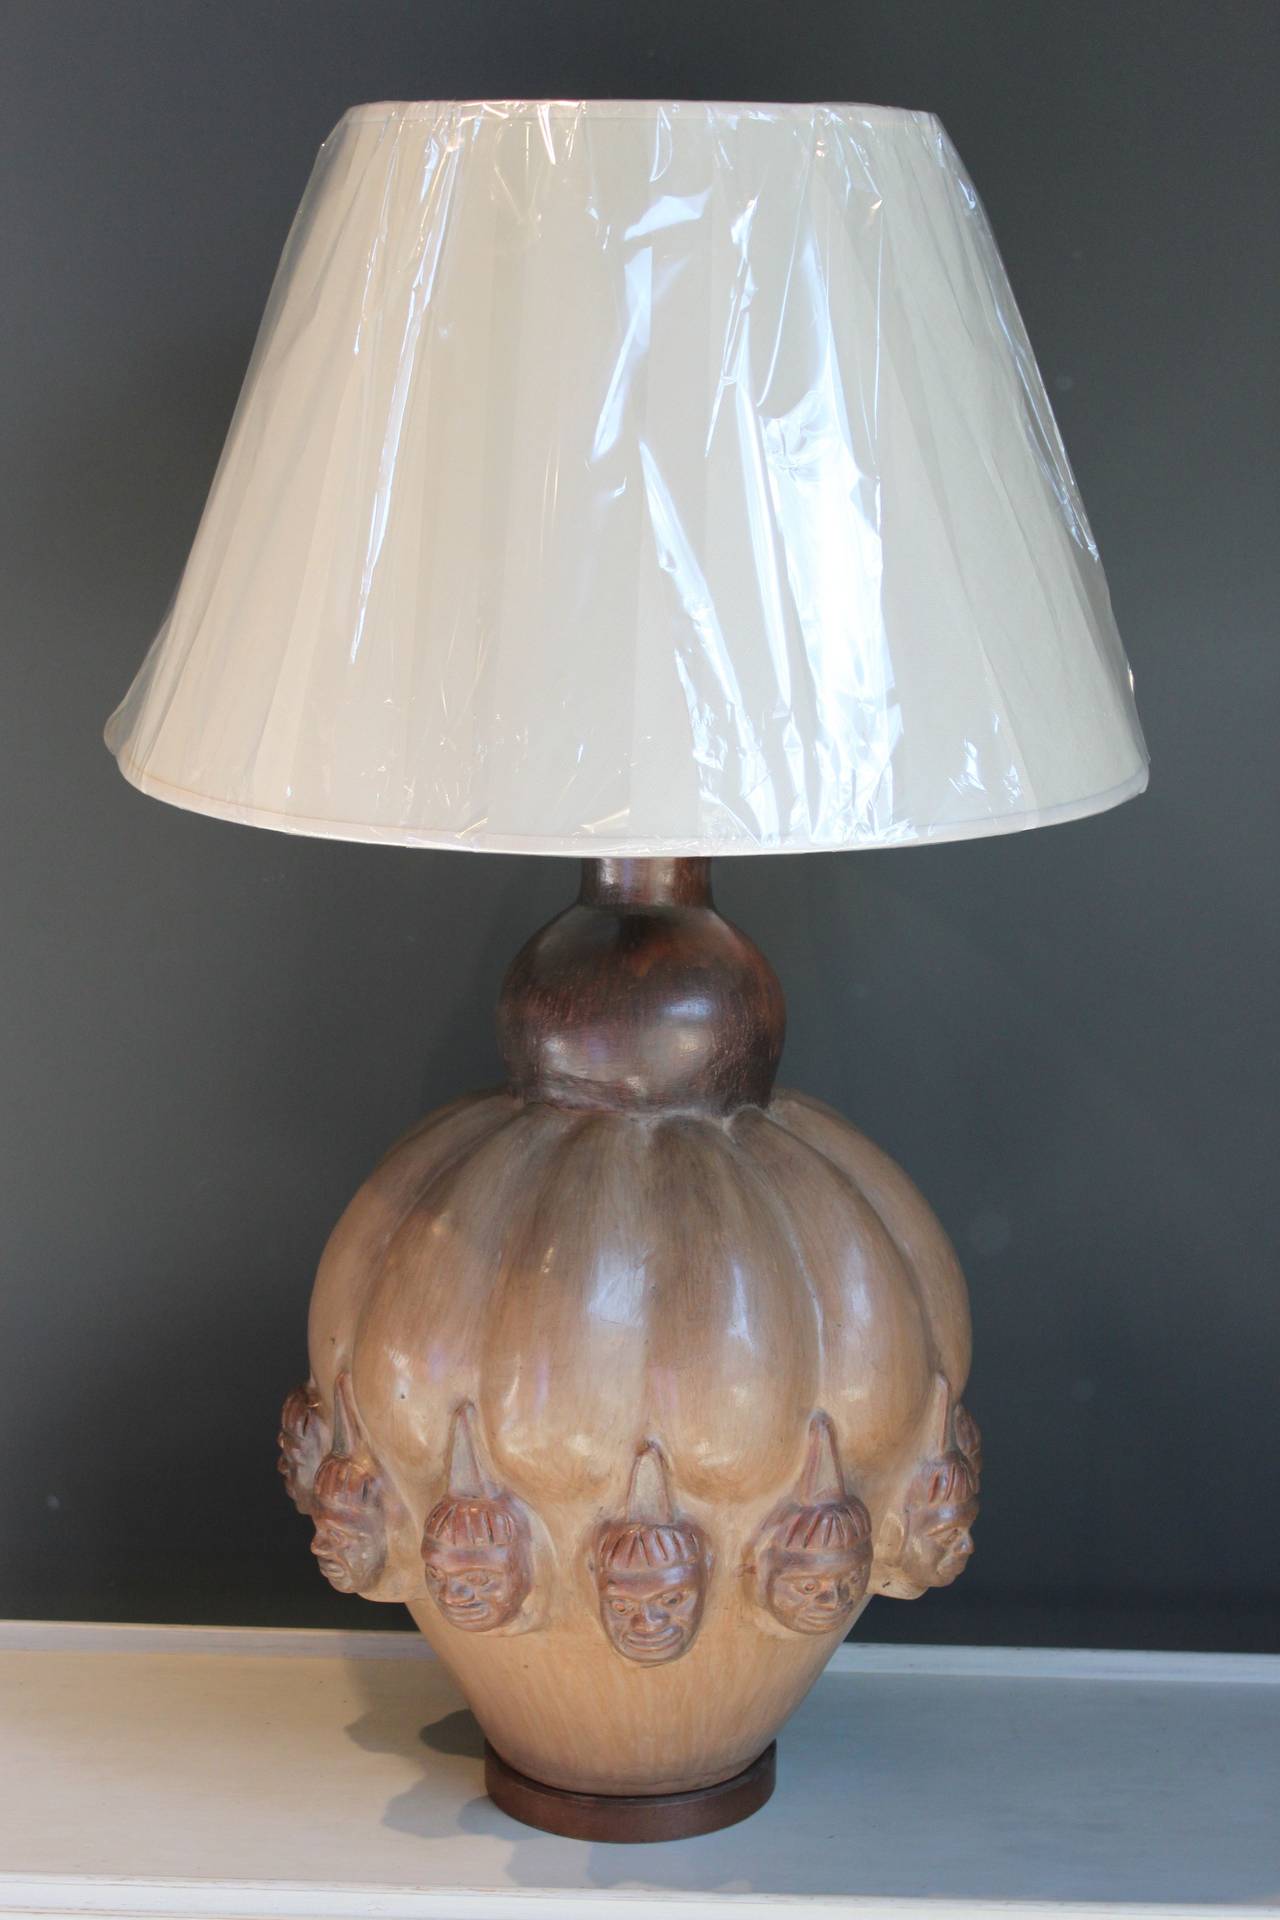 Monumental pottery gourd-shaped lamp with figured heads resting on a wood base. This lamp has been rewired and includes a new shade. This exceptionally large lamp has a wonderful warm patina. 

The lamp itself is 16.5